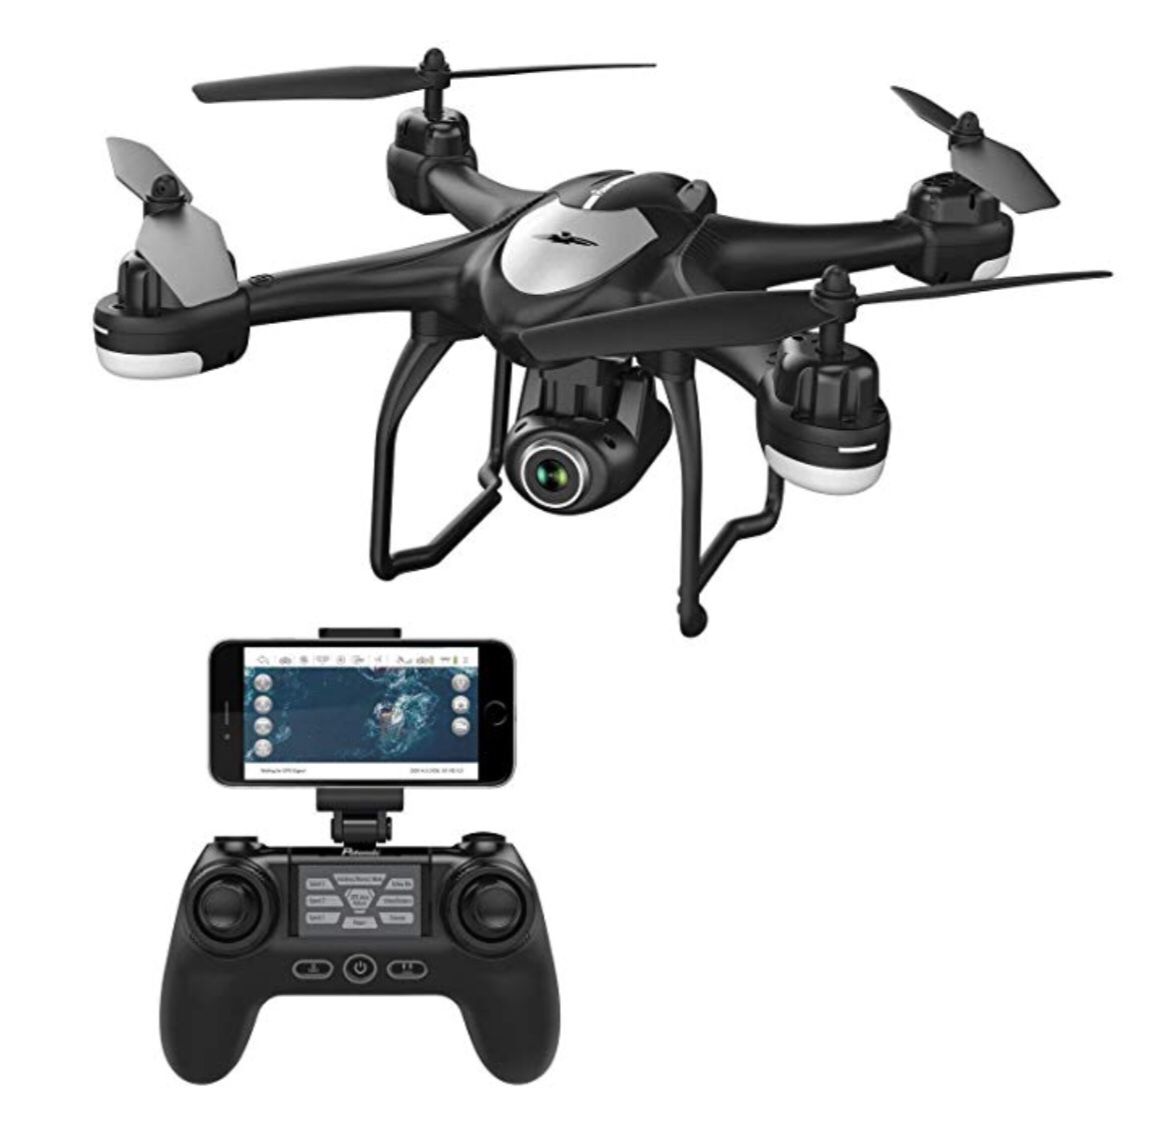 Potensic T18 GPS Drone, FPV RC Quadcotper with Camera 1080P Live Video, Dual GPS Return Home, Follow Me, Adjustable Wide-Angle Camera, Altitude Hold,